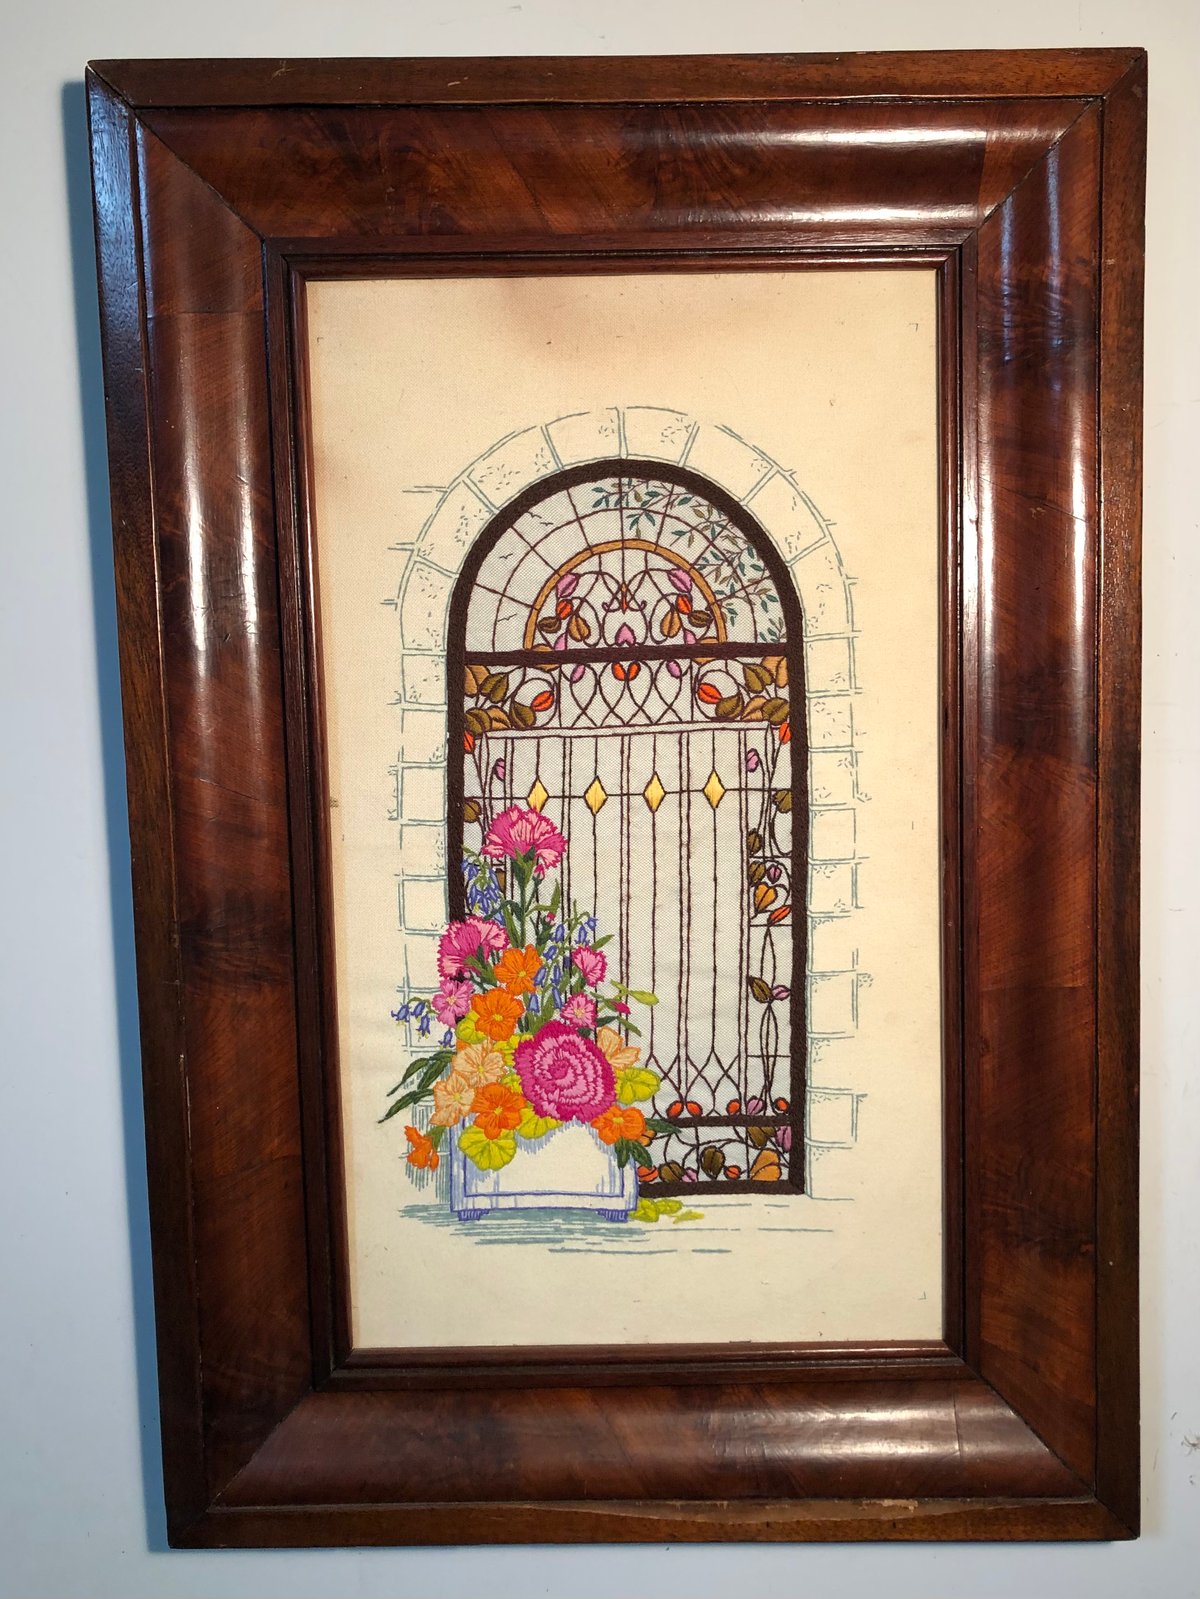 Image of Antique frame with embroidery